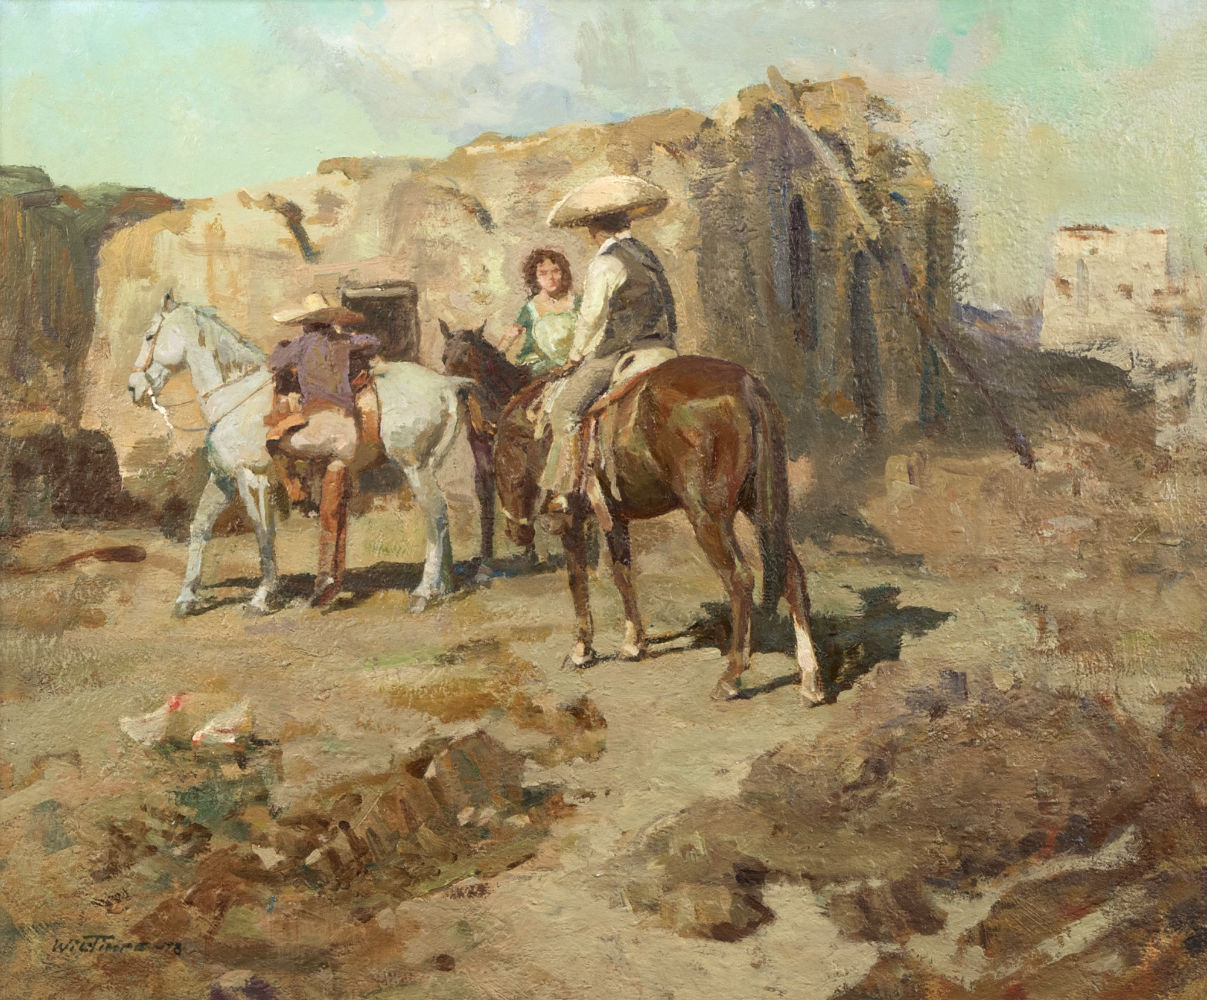 One of approximately a half dozen works by 20th century Western painter Wil Timpe consigned from the Los Angeles Goldfield Collection to be featured in Moran’s January Studio auction, ‘South of Nogales’ is expected to realize $800/$1,200. John Moran Auctioneers image